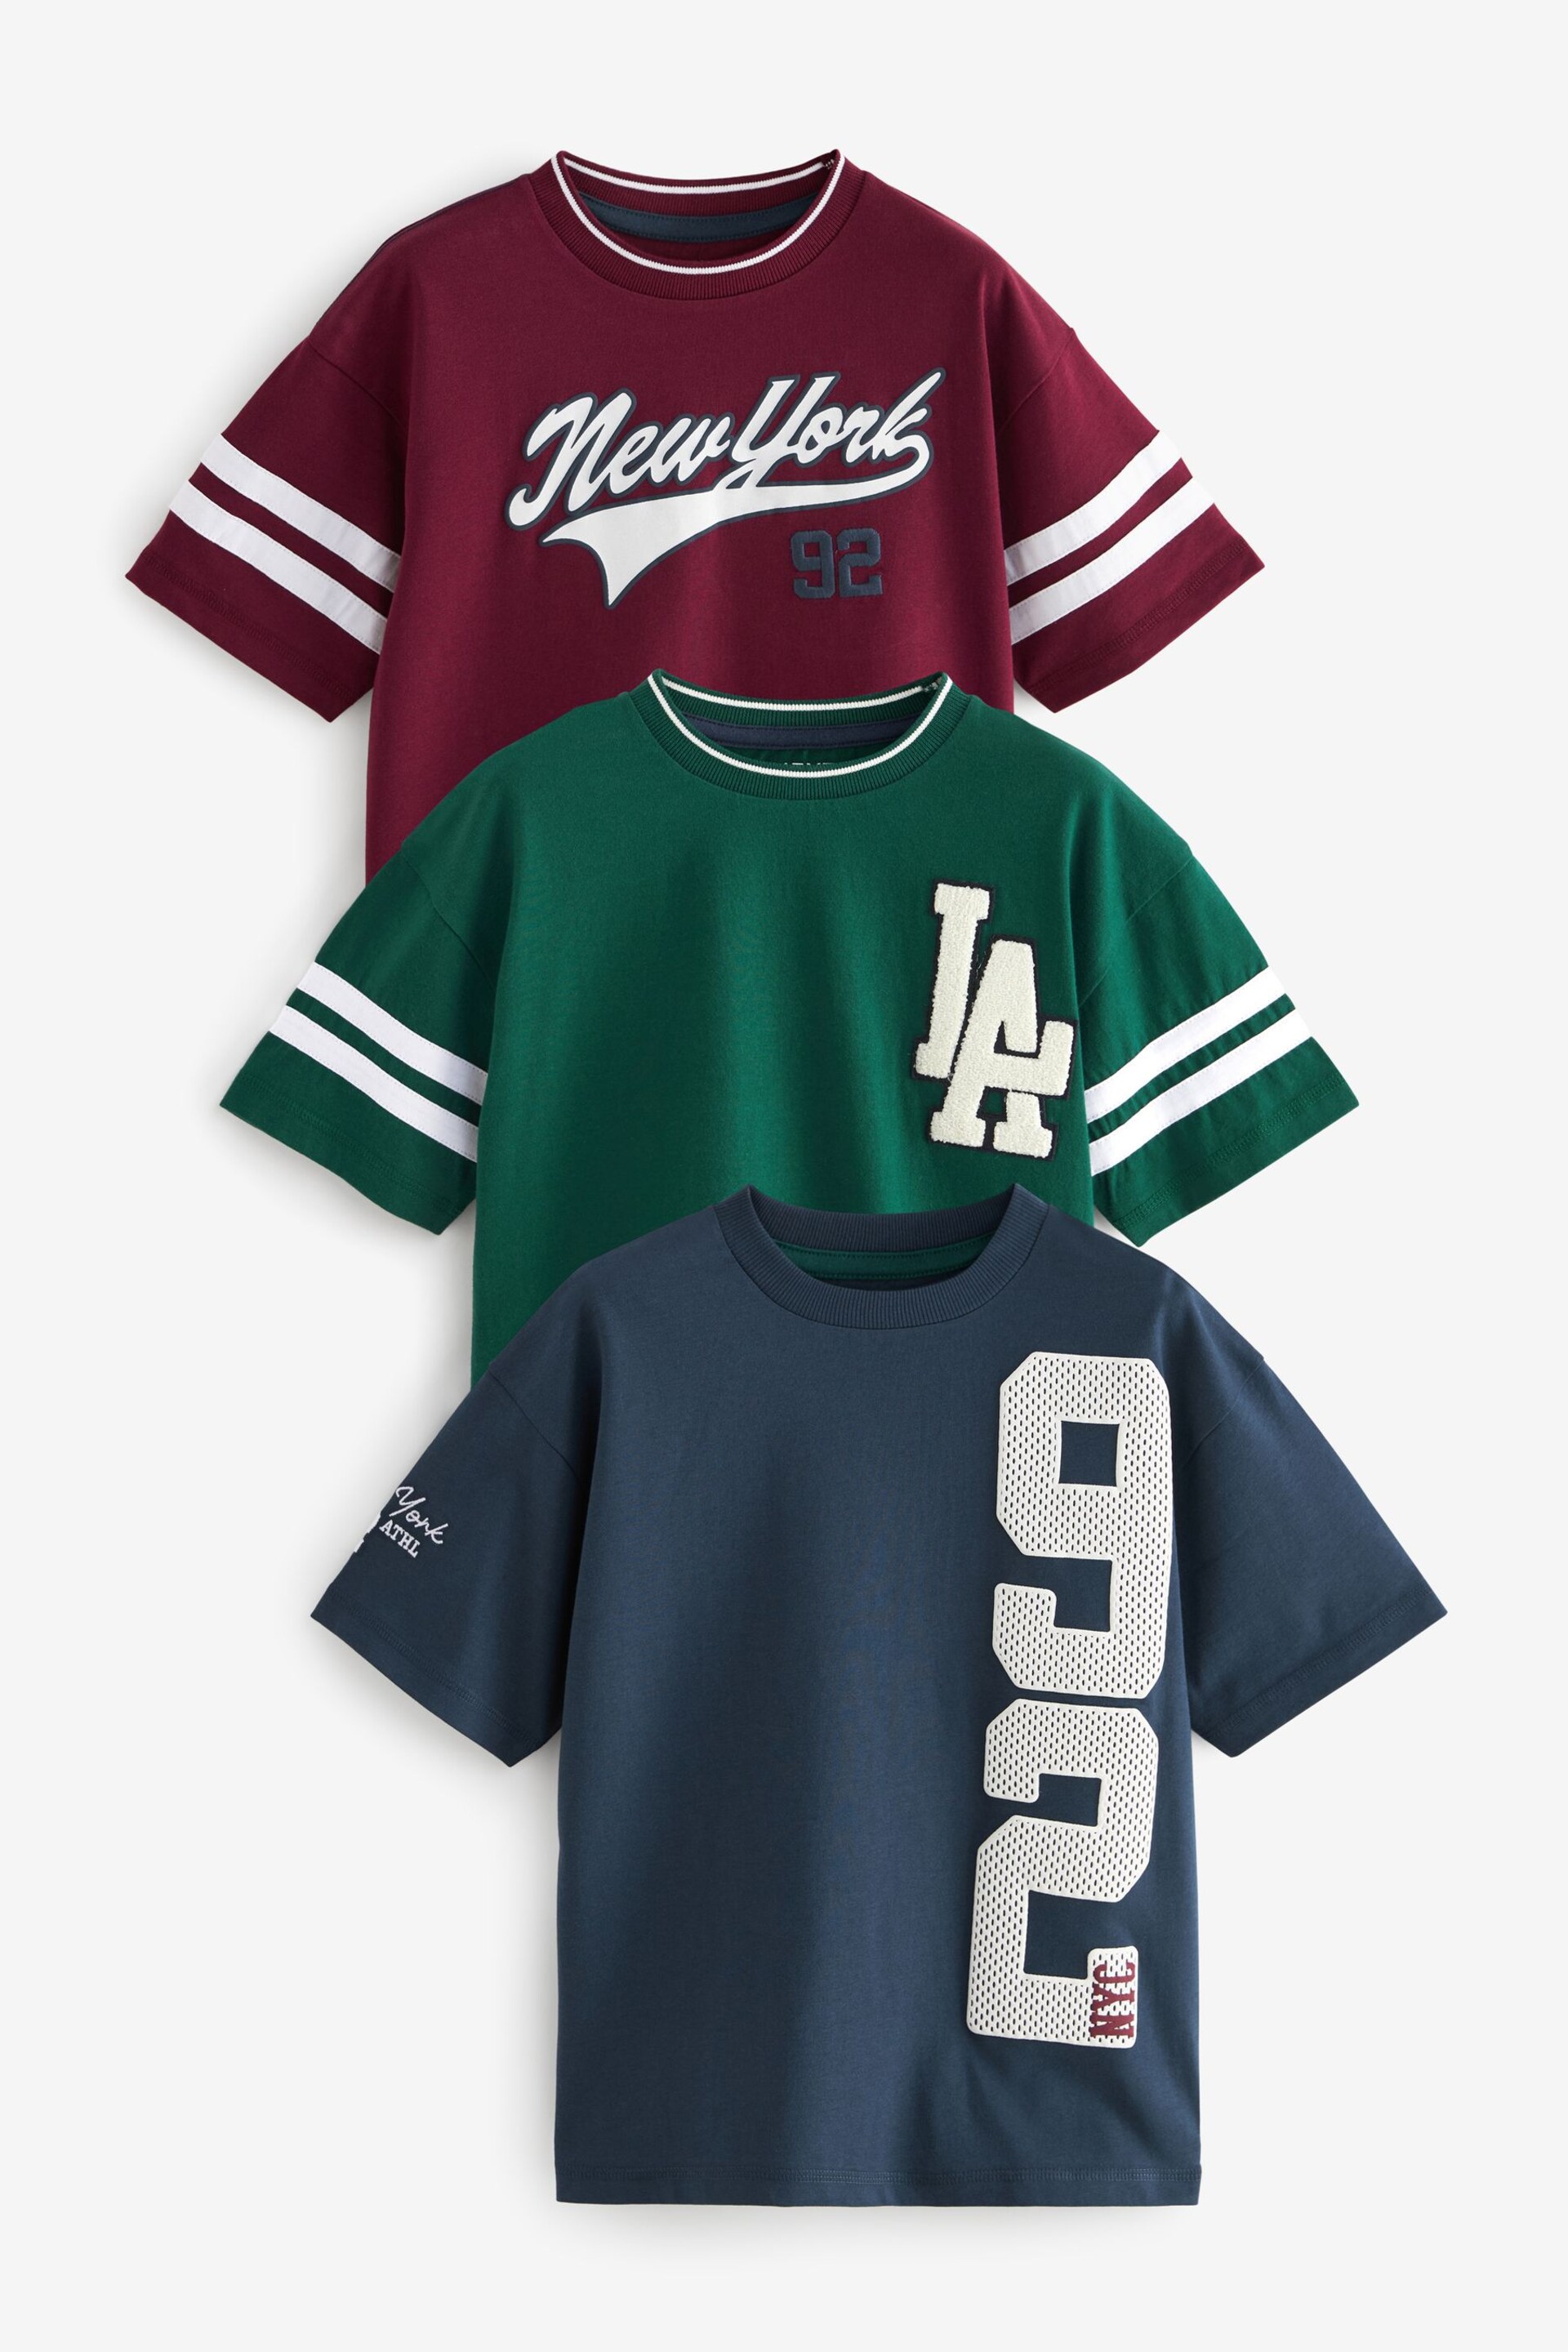 Berry/Navy/Green Varsity Graphic Relaxed Fit Short Sleeve T-Shirts 3 Pack (3-16yrs) - Image 1 of 6